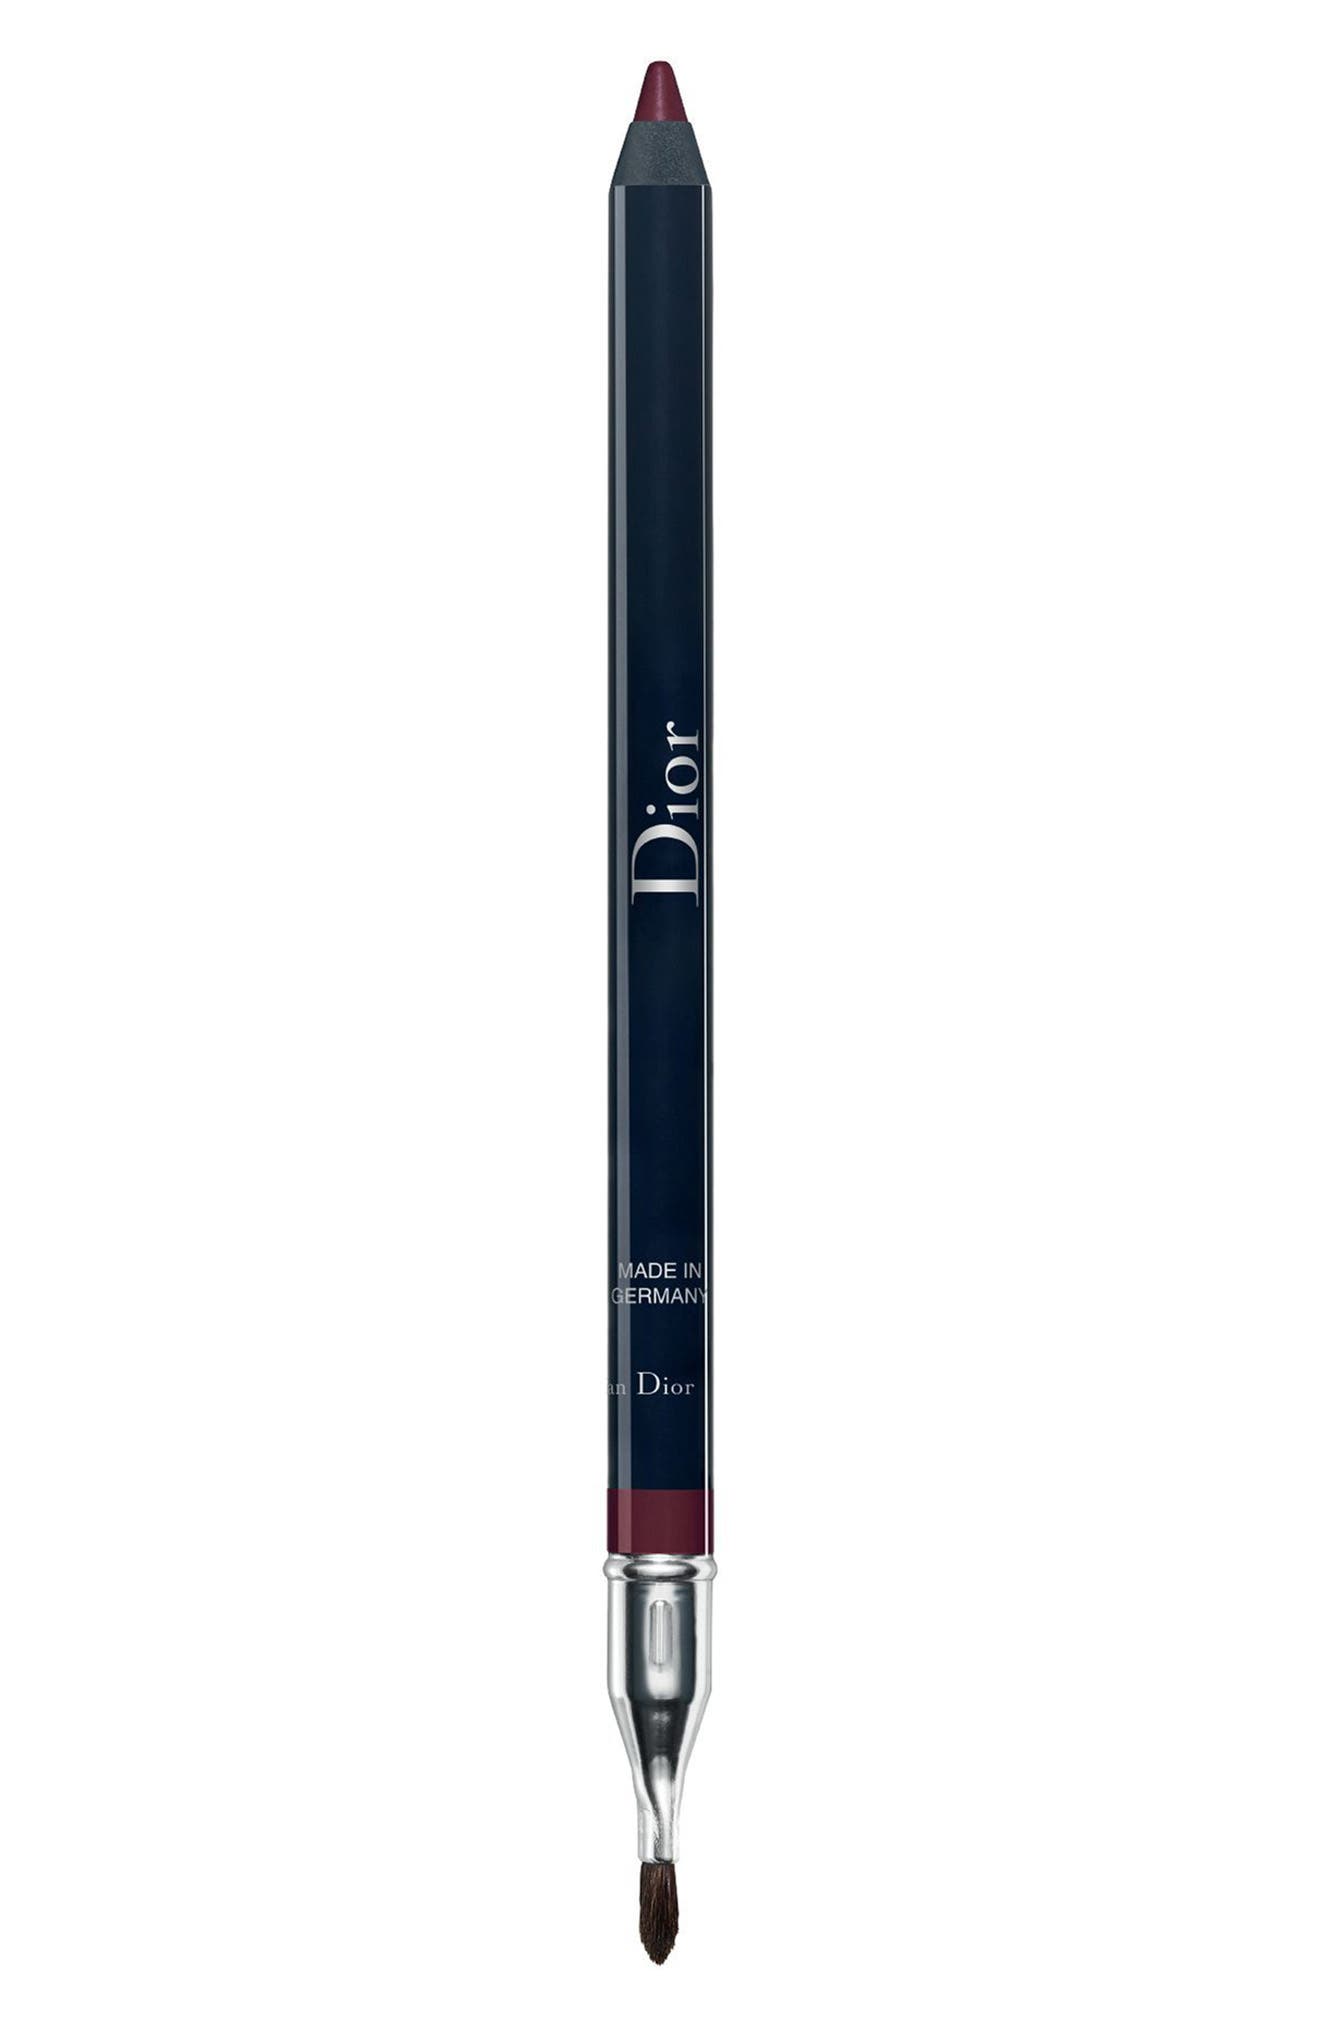 EAN 3348901359924 product image for Dior Rouge Contour Lip Liner in 948 Enigmatic Matte at Nordstrom | upcitemdb.com